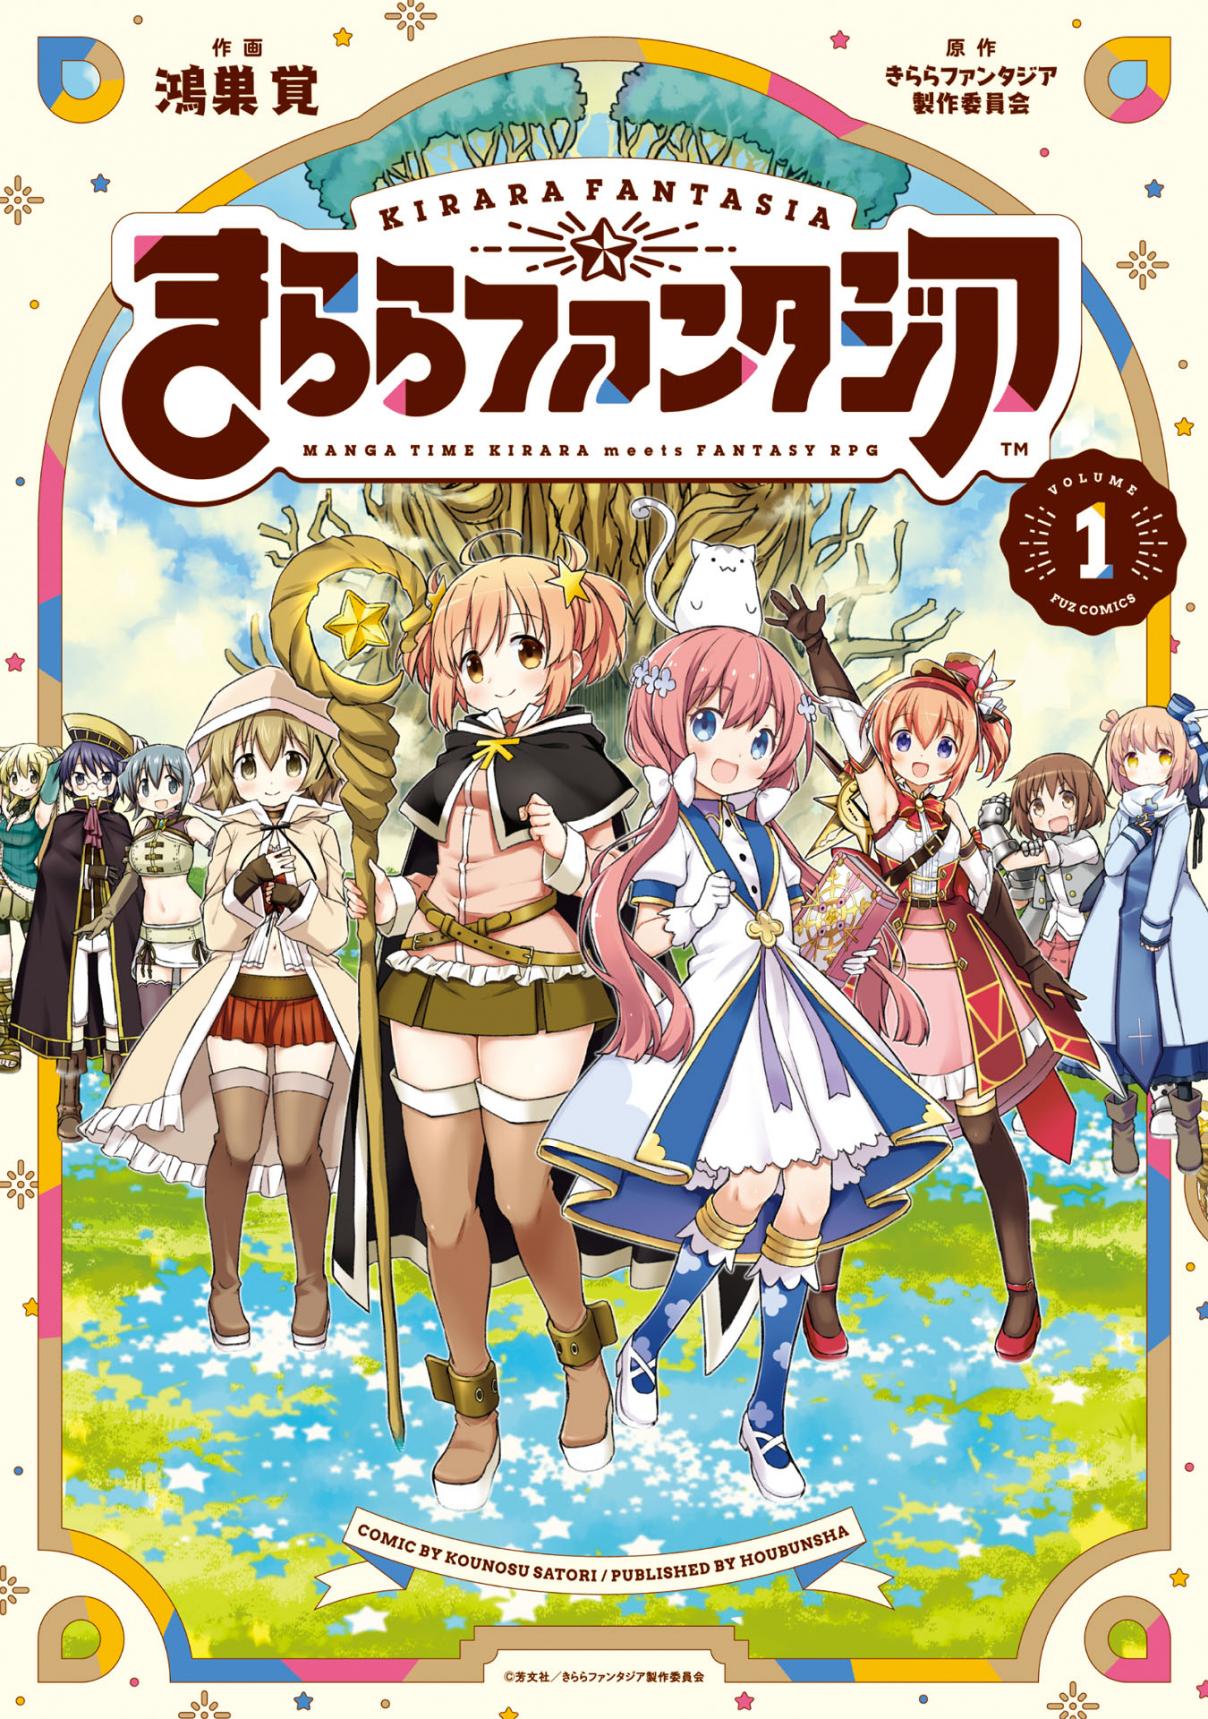 Kirara Fantasia Vol. 1 Ch. 3 Let's look for Hiro and the rest!